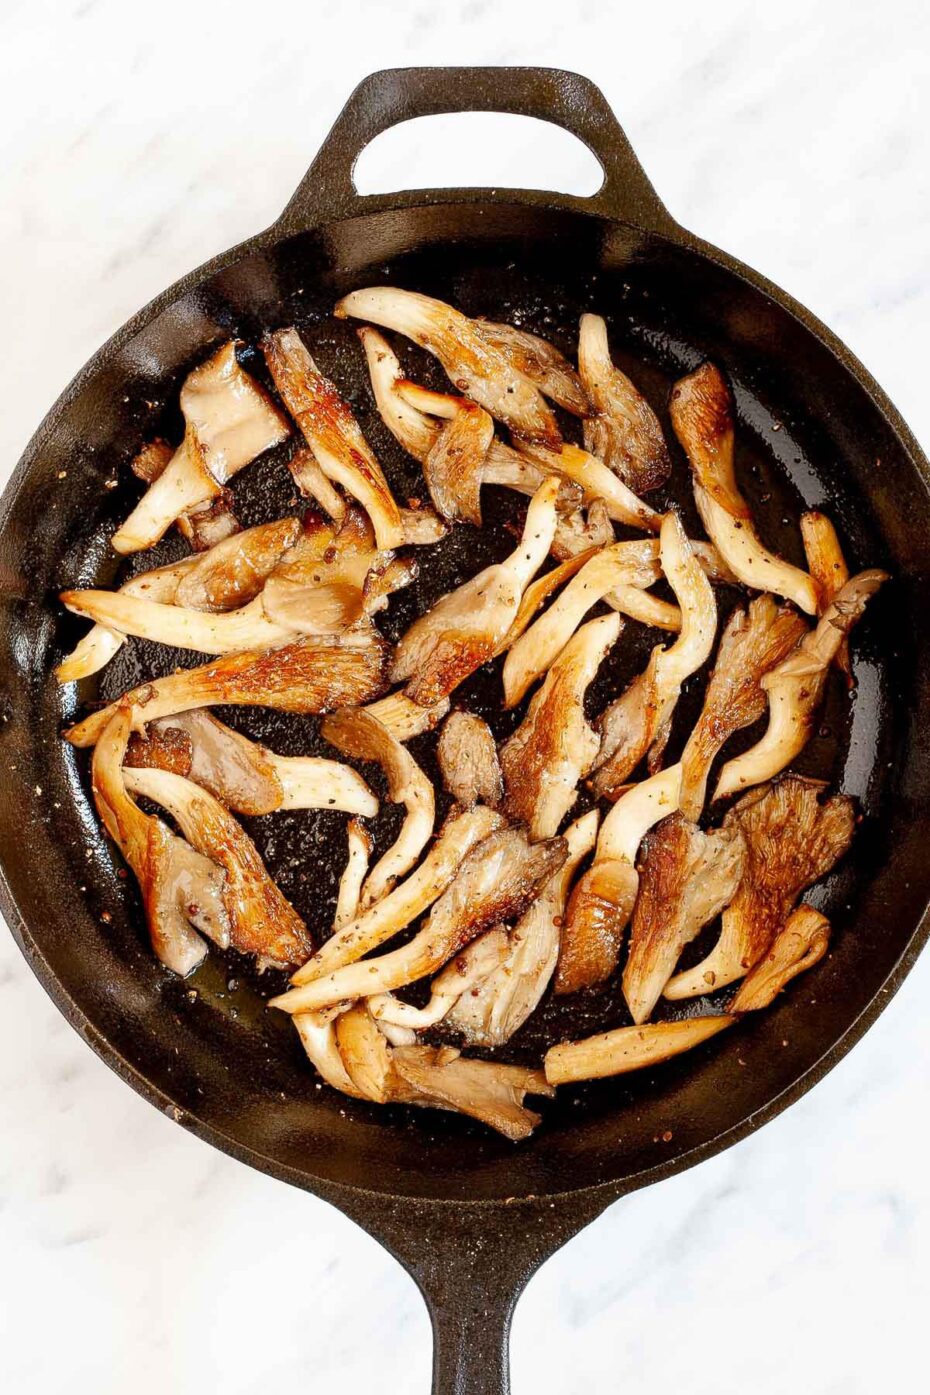 Black cast iron skillet from above with crispy brown oyster mushroom